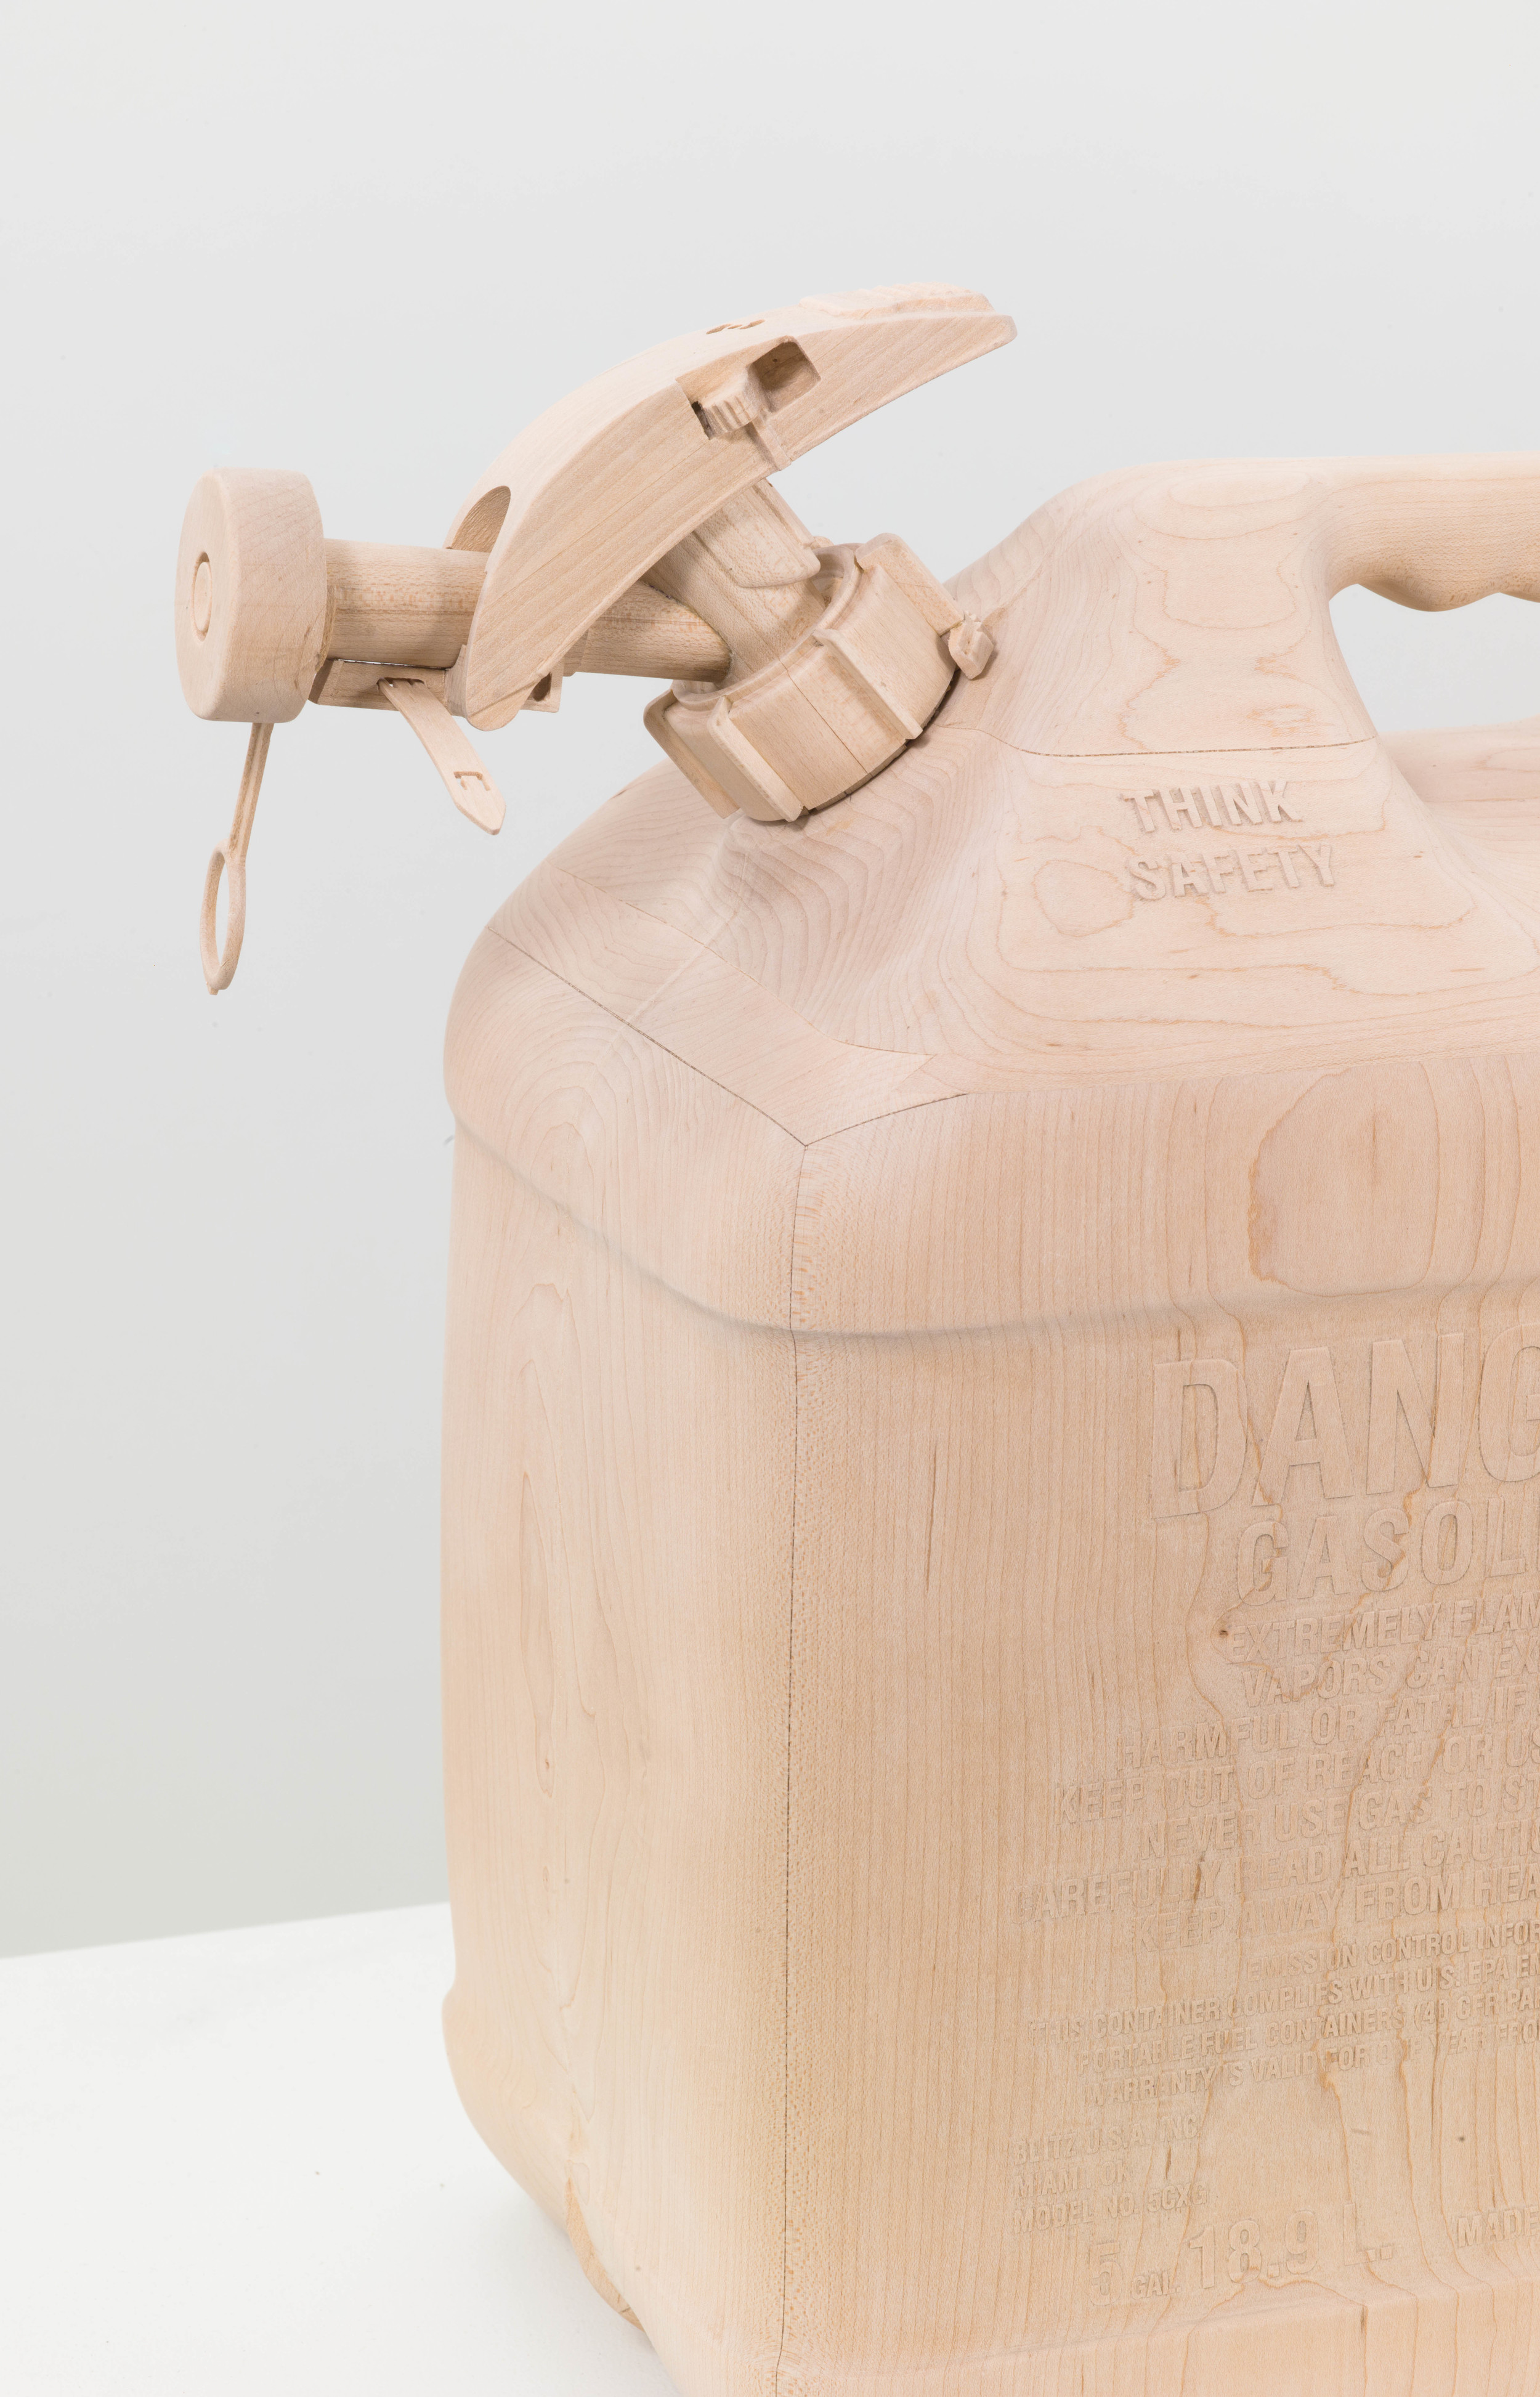  Gas Can, 2013, Maple wood, 16 1/2 x 8 1/2 x 17 1/2 inches 